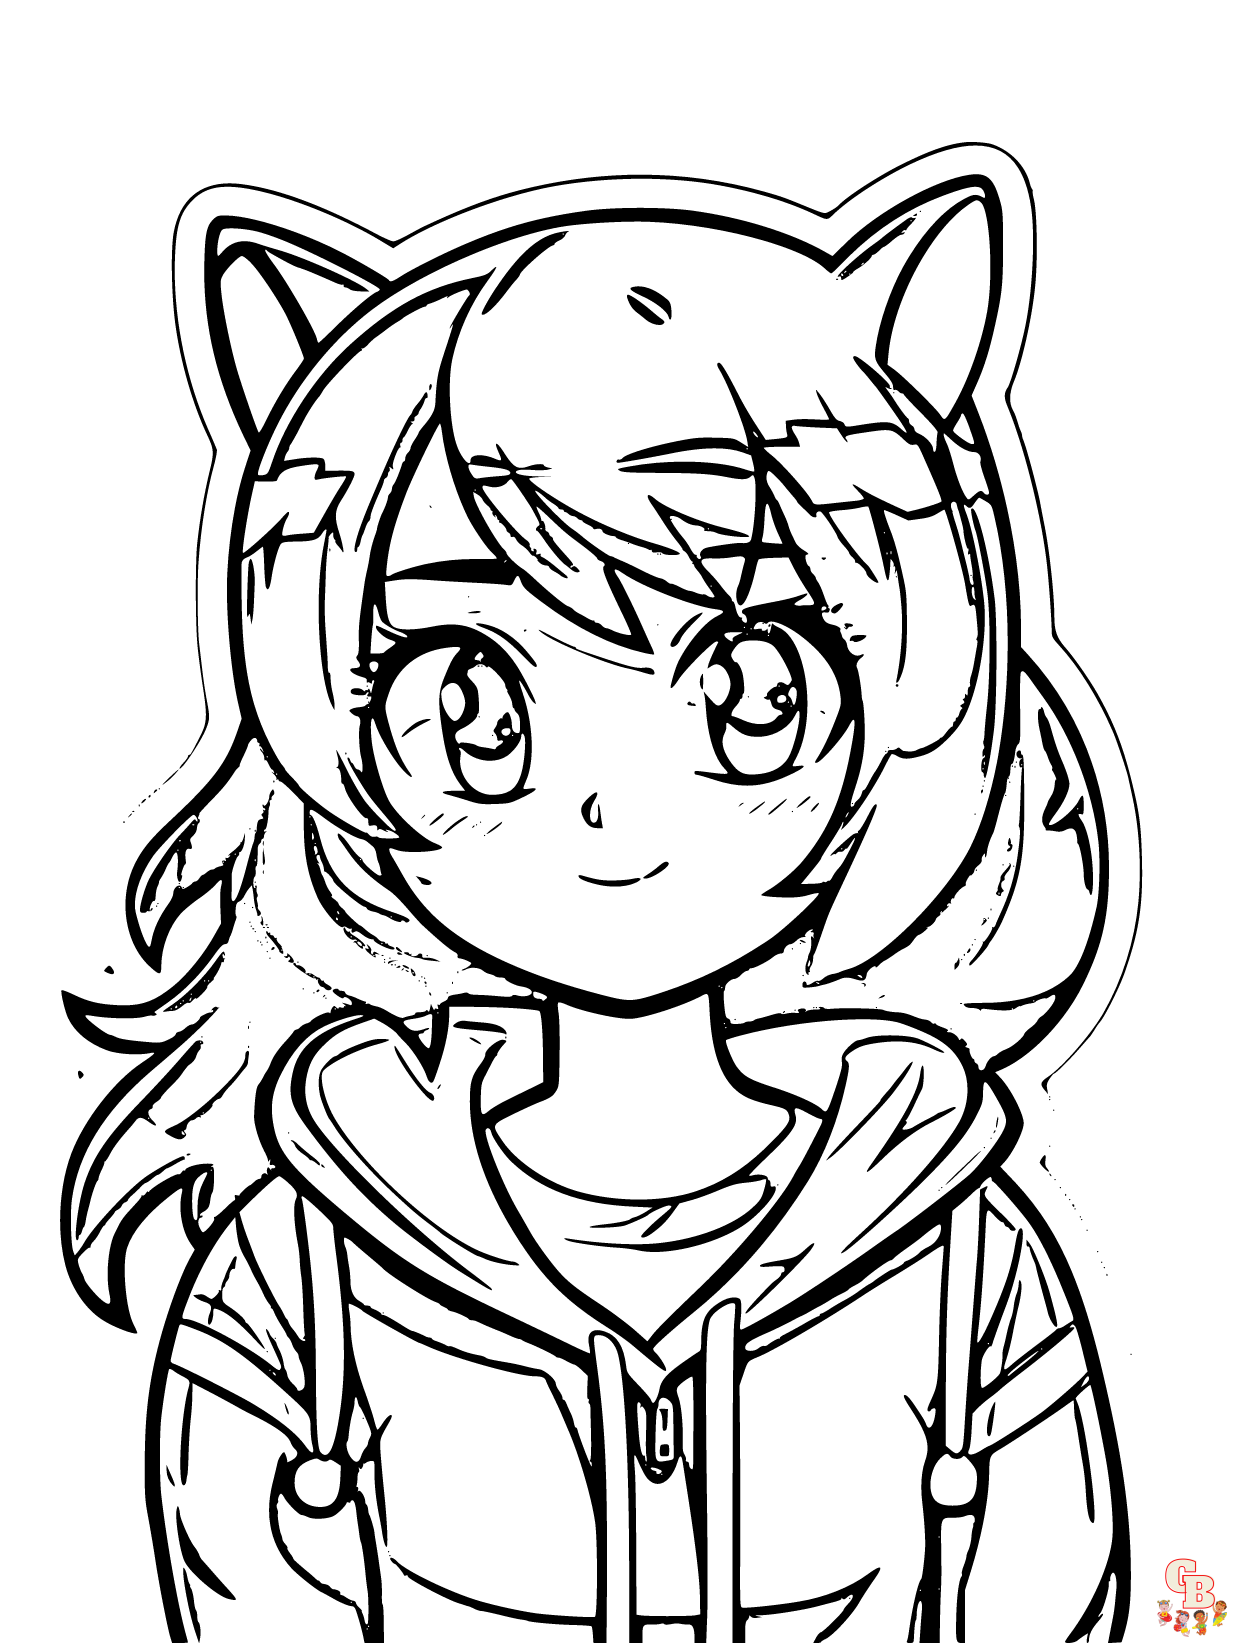 Aphmau Coloring Pages to print